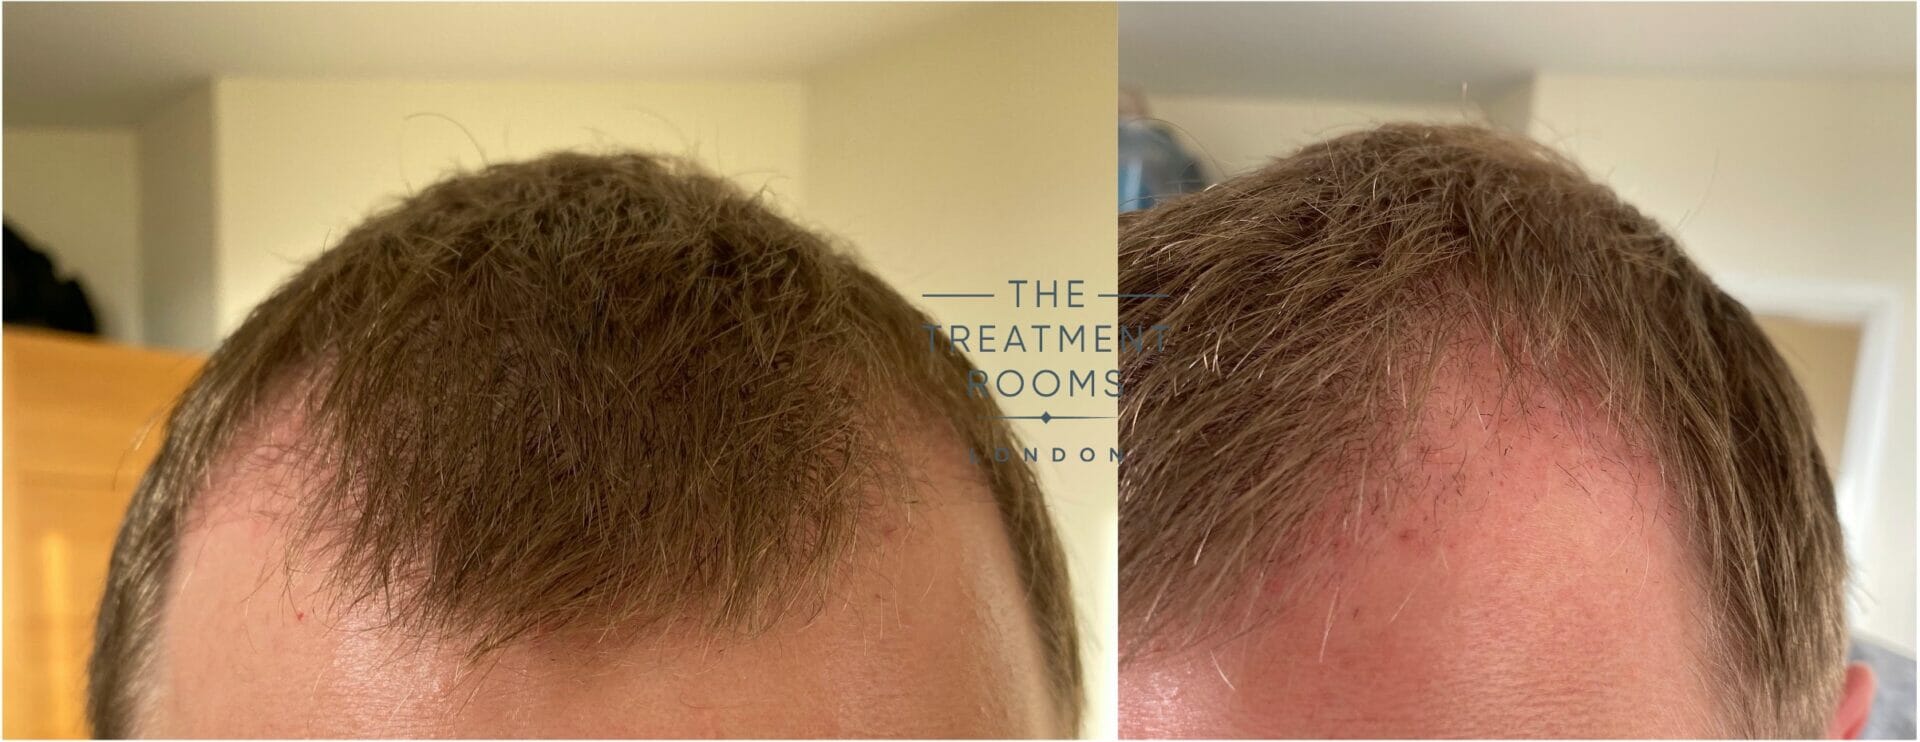 Results - The Hair Dr